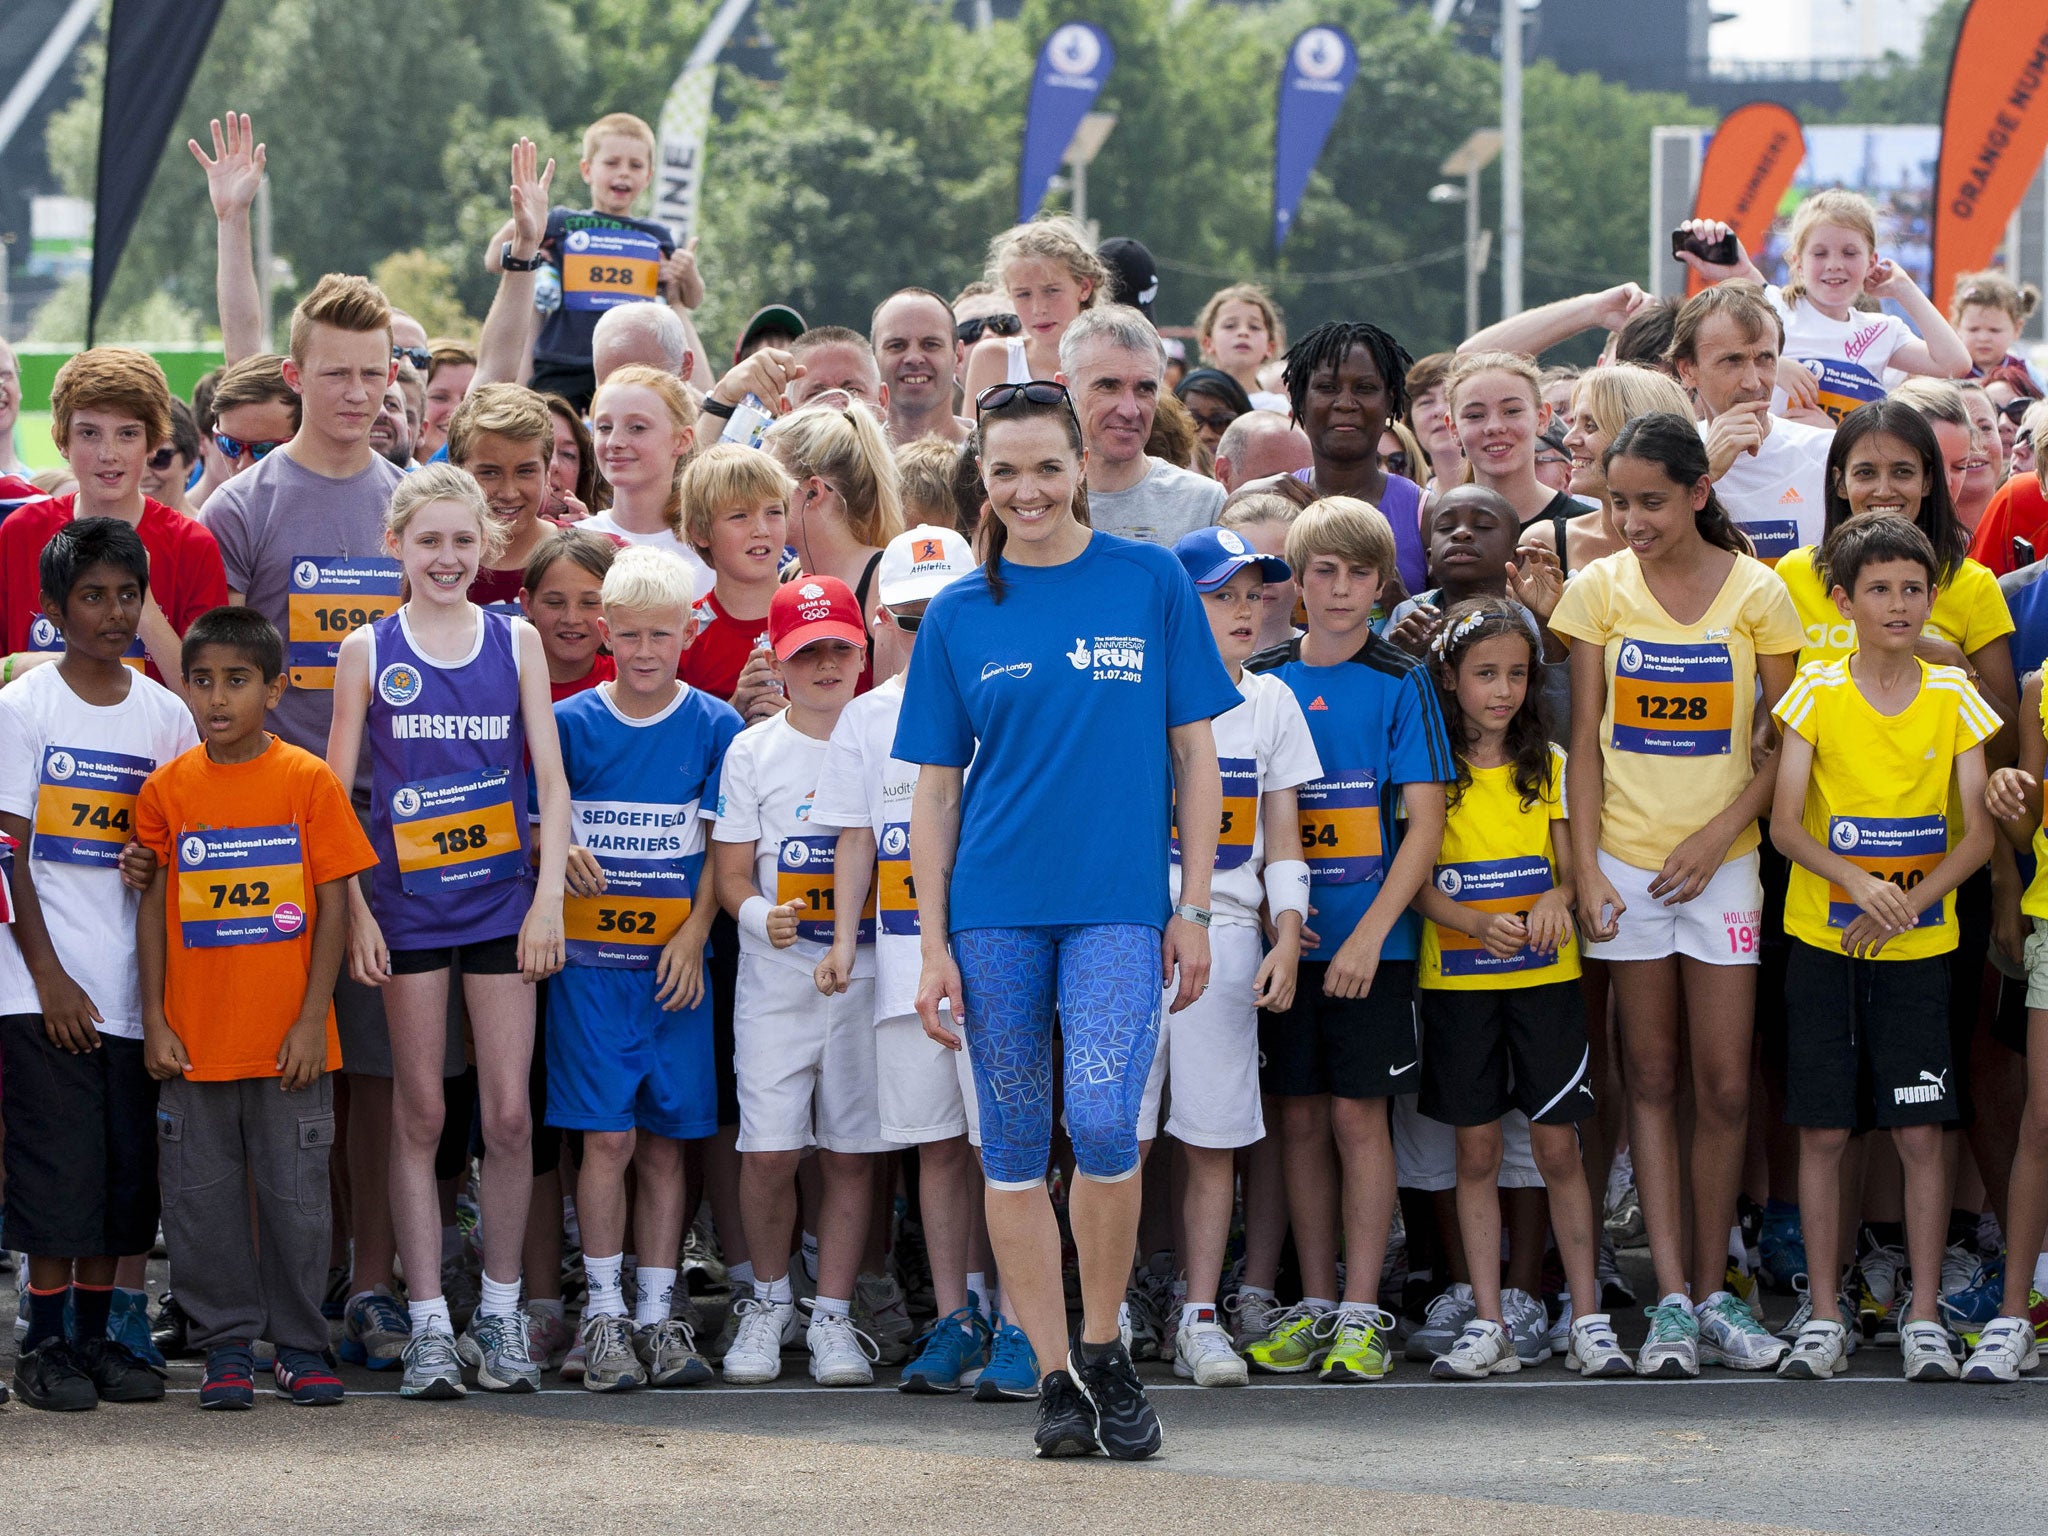 Victoria Pendleton joins 12,500 other runners at the Family Run yesterday. The 1.5-mile circuit around the Olympic Park was the first public event to use the Olympic Stadium since London 2012